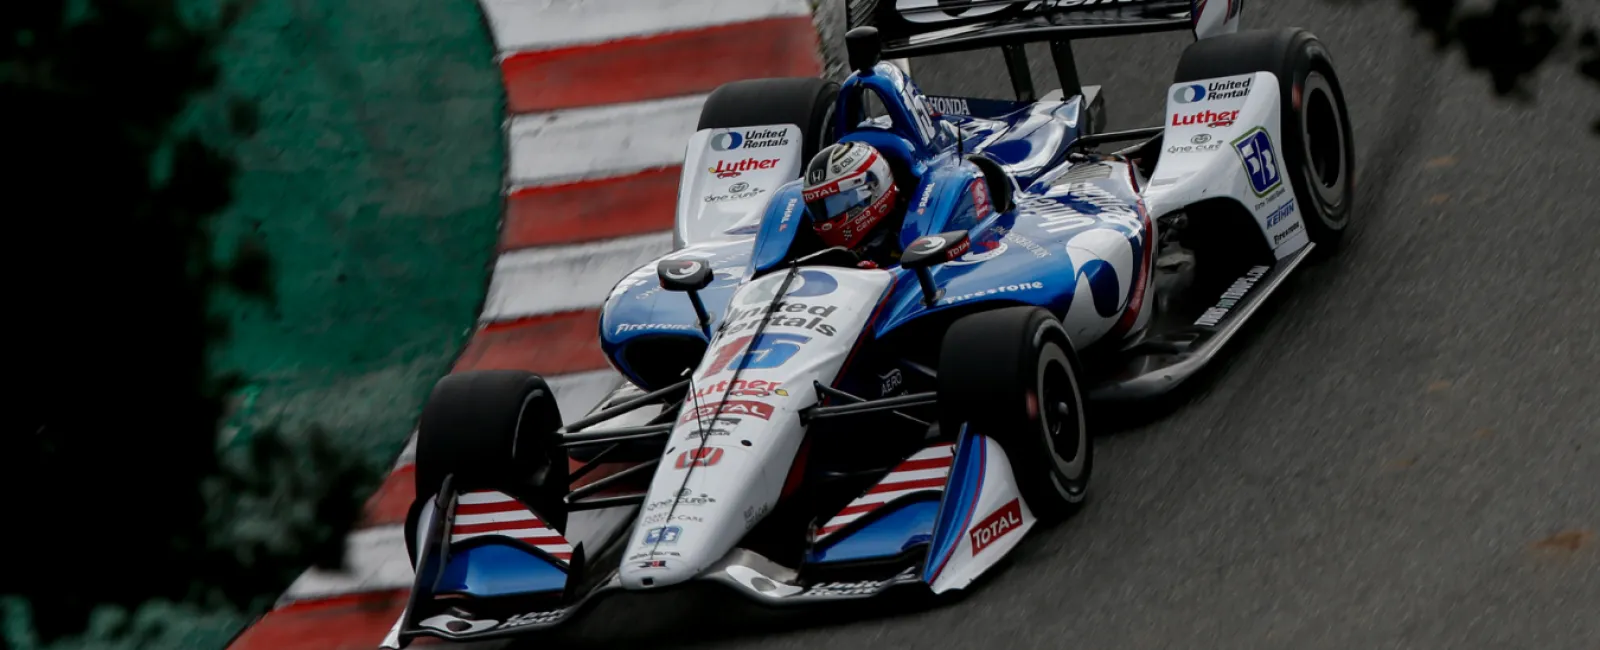 Rahal Finishes 12th In Season Finale